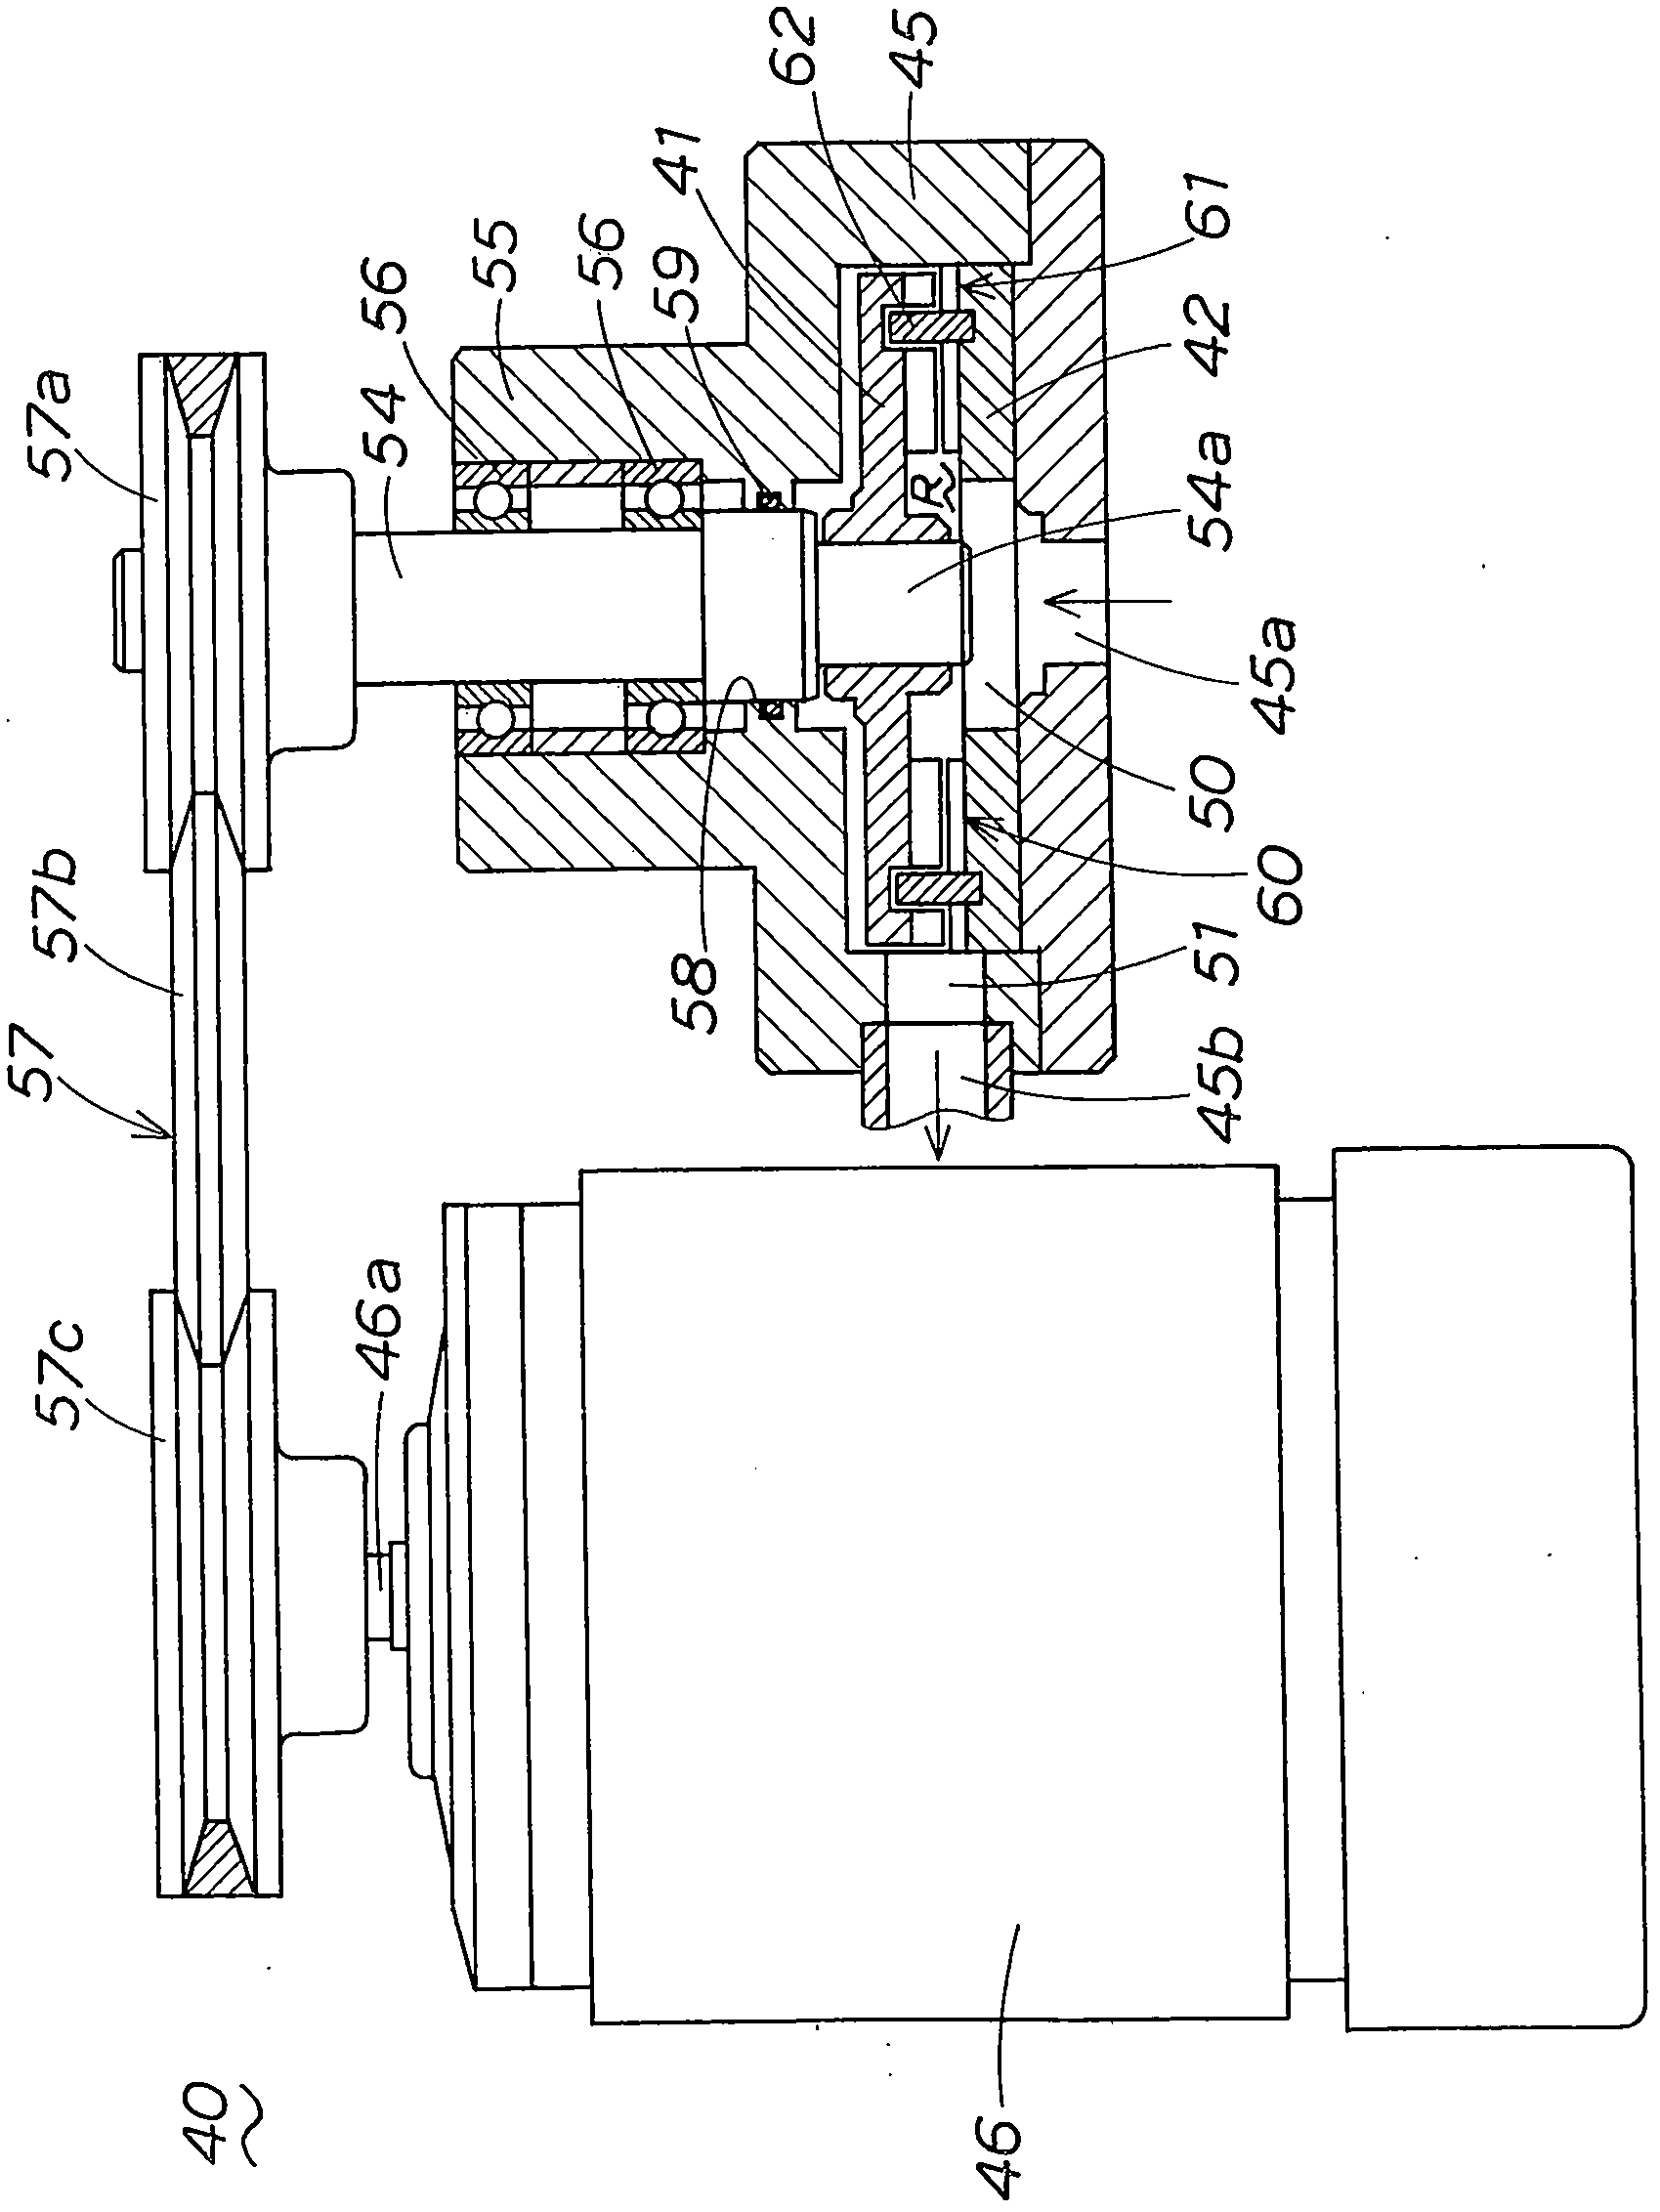 Pulp making device of used paper recycling apparatus and used paper recycling apparatus